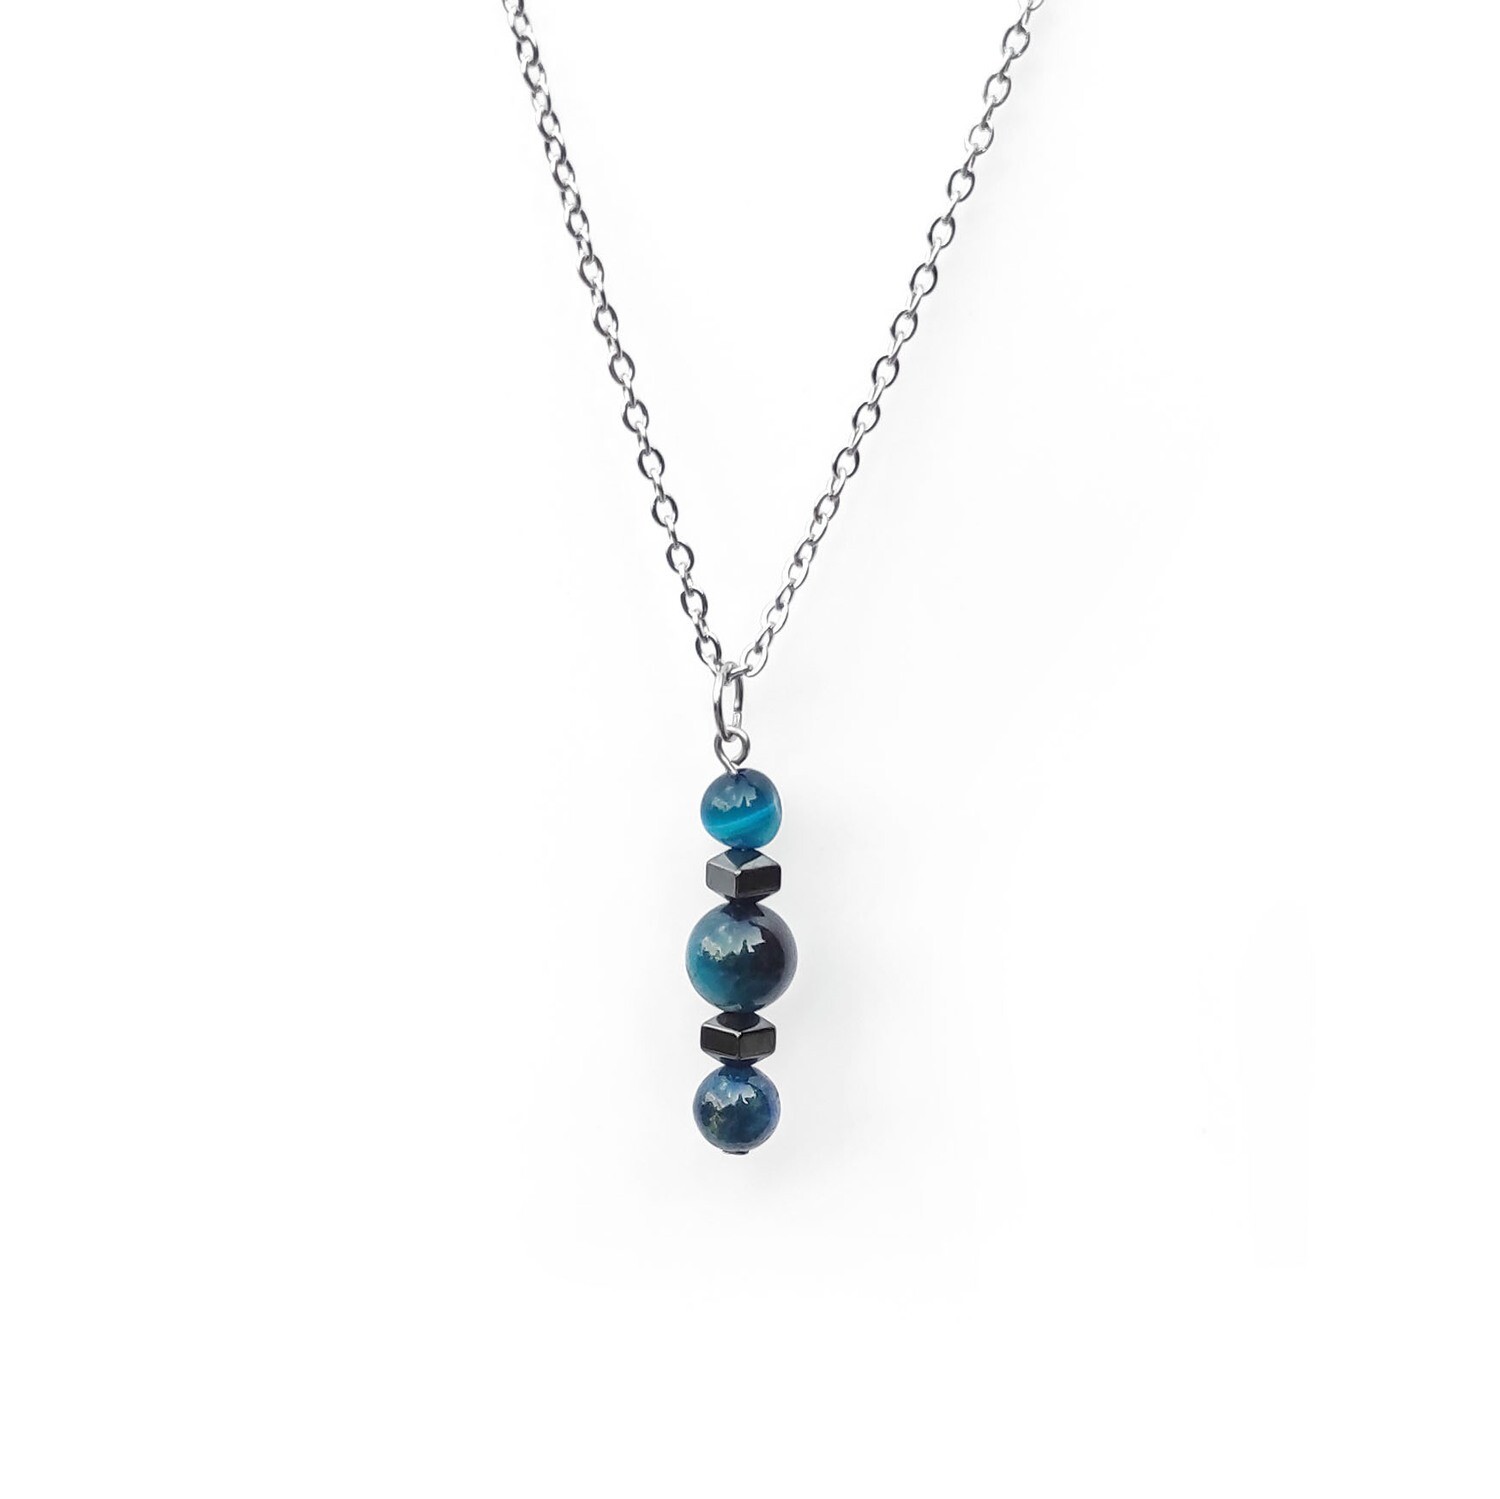 Blue Tigers Eye and Hematite necklace